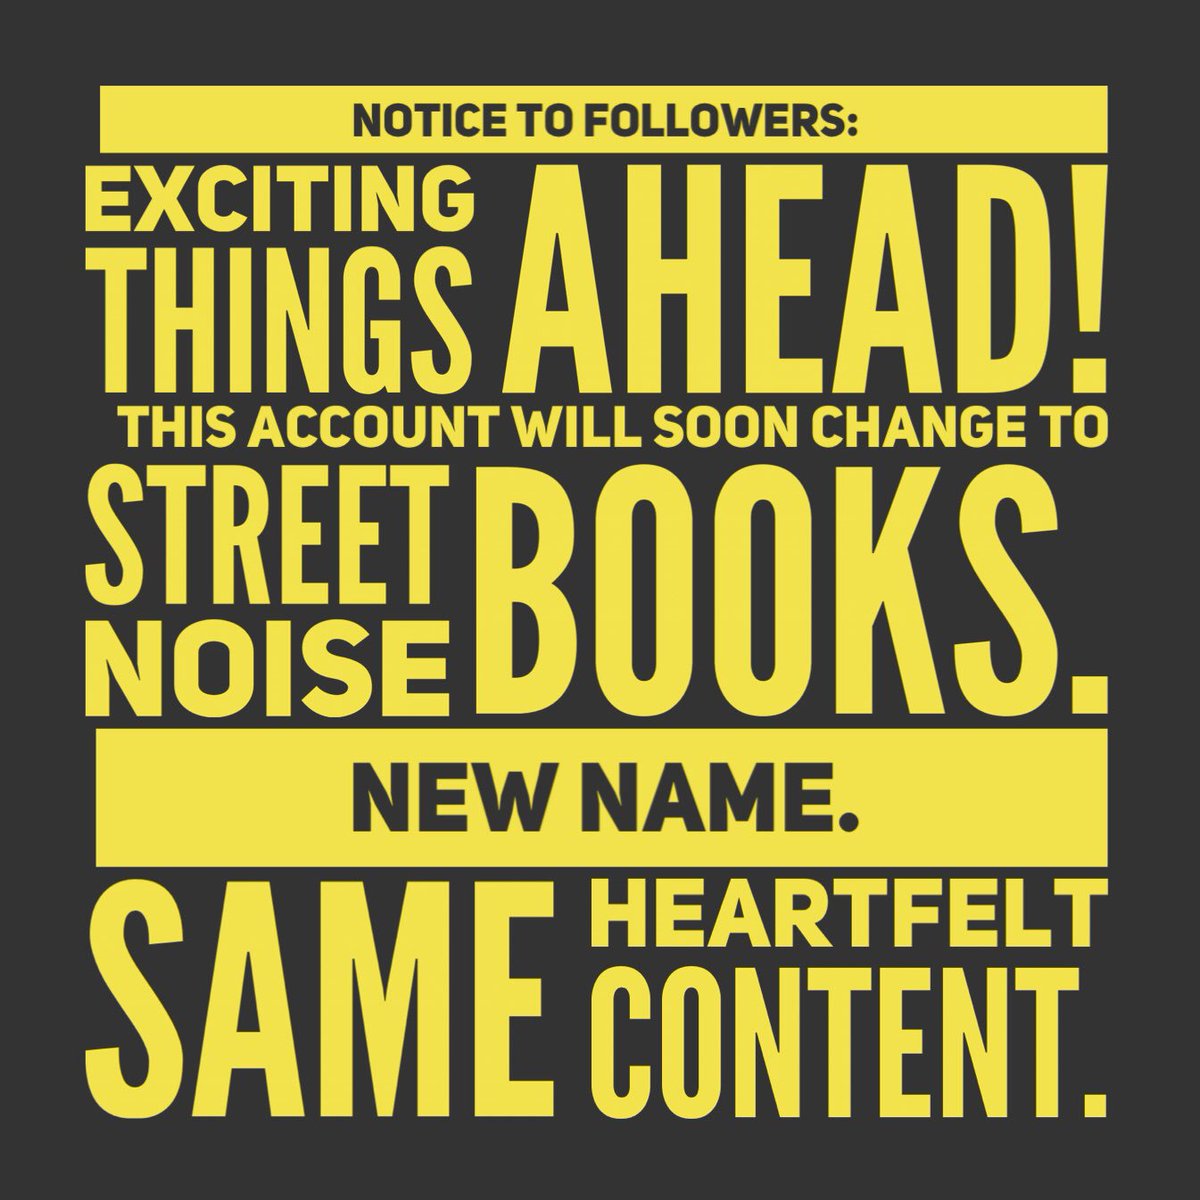 Notice to followers: Exciting things ahead! This account will soon change to Street Noise Books. New name. Same heartfelt content.
.
#streetnoisebooks #indiepublishing #yanonfiction #graphicnovel #nonfiction #graphicmemoir #artasresistance #realbooks #giveadamn